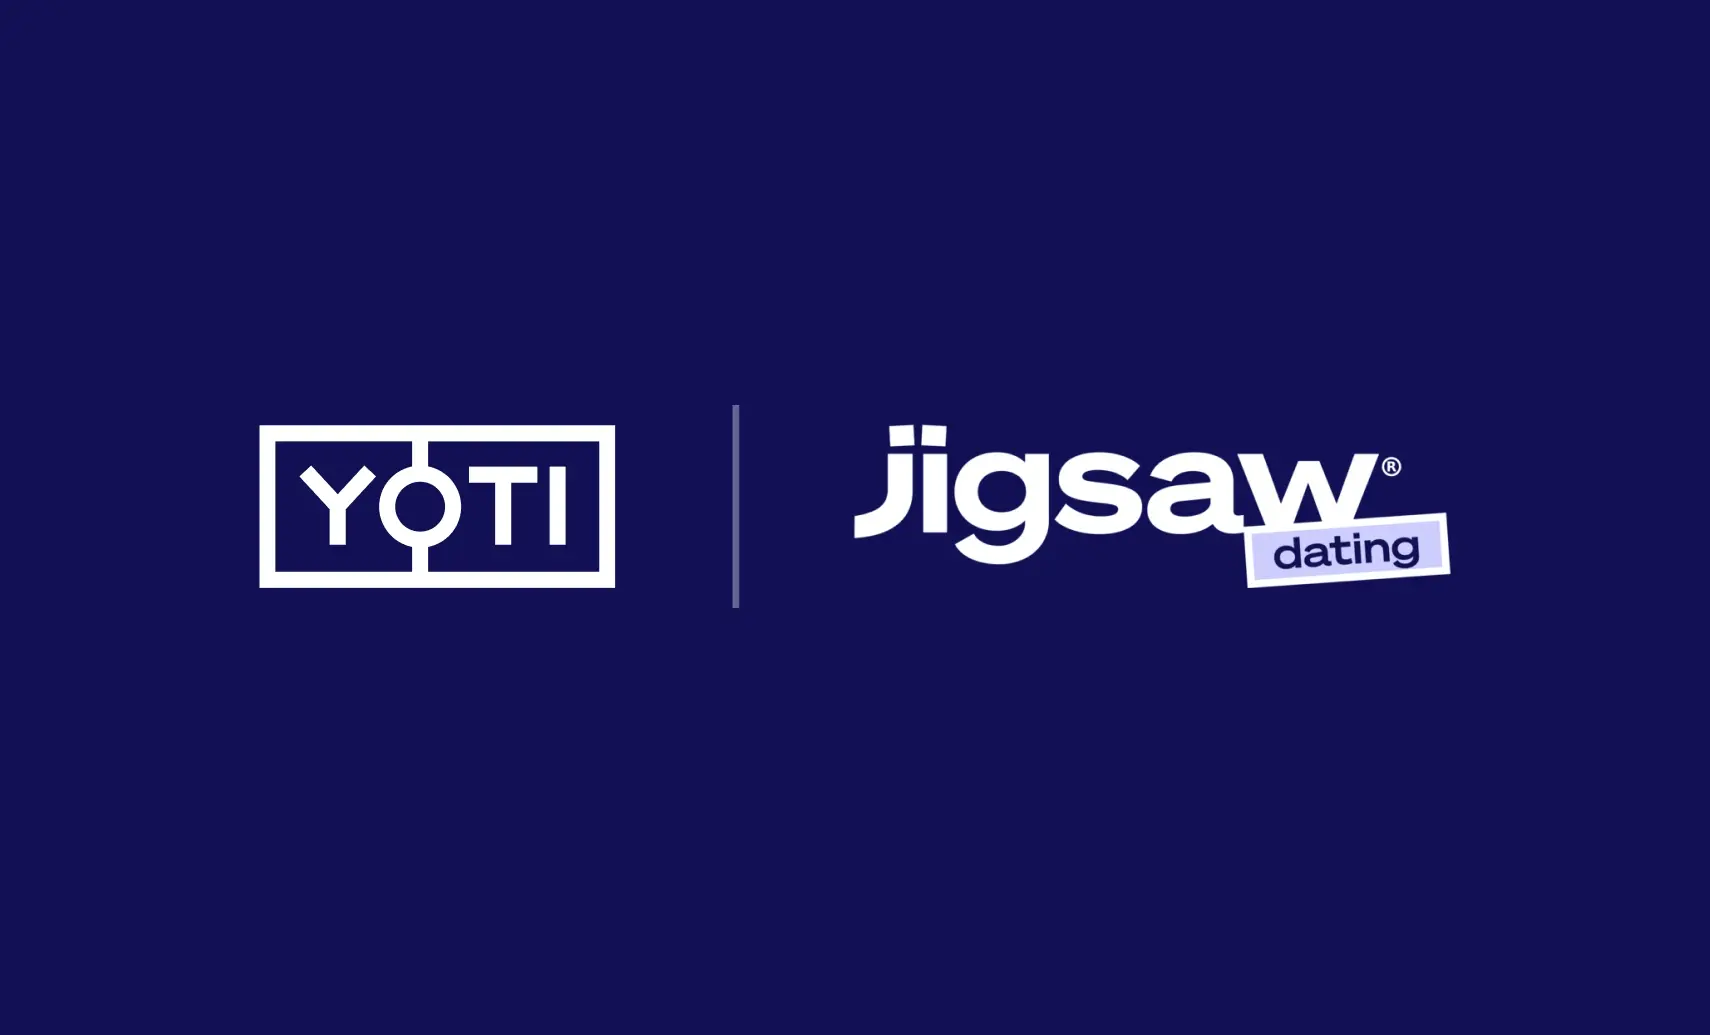 Yoti and Jigsaw dating logos presented together